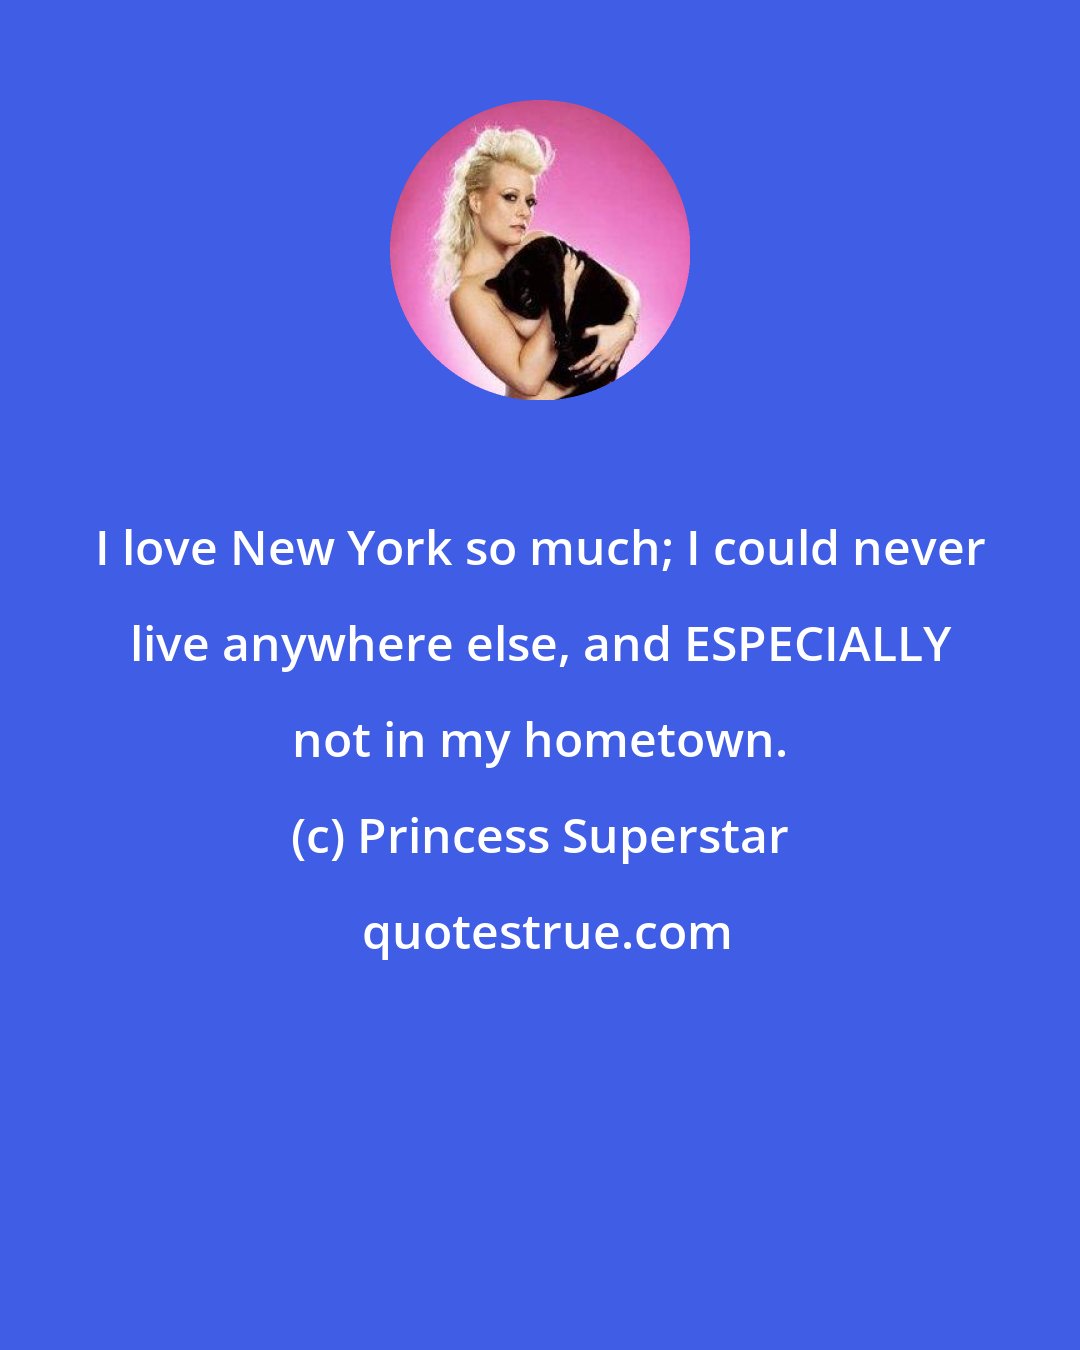 Princess Superstar: I love New York so much; I could never live anywhere else, and ESPECIALLY not in my hometown.